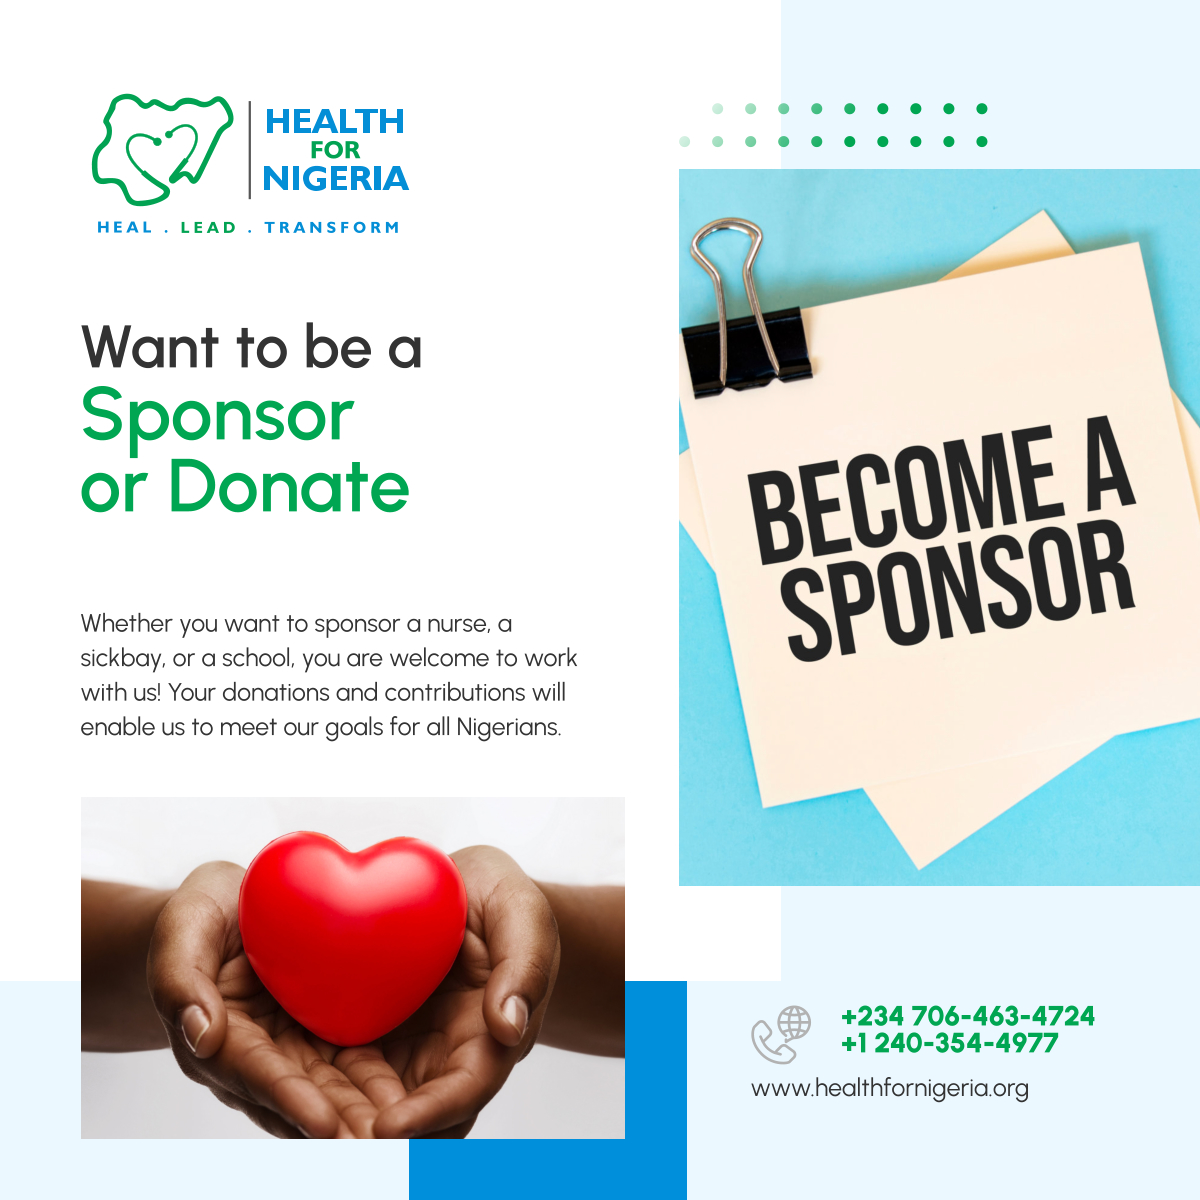 Vital donors are the backbone of Health for Nigeria, donating an amount that ensures we can provide access to quality primary care services for Nigerians all over the country. Be part of our vital donors!

#Sponsor #CharityOrganization #HealthForNigeria